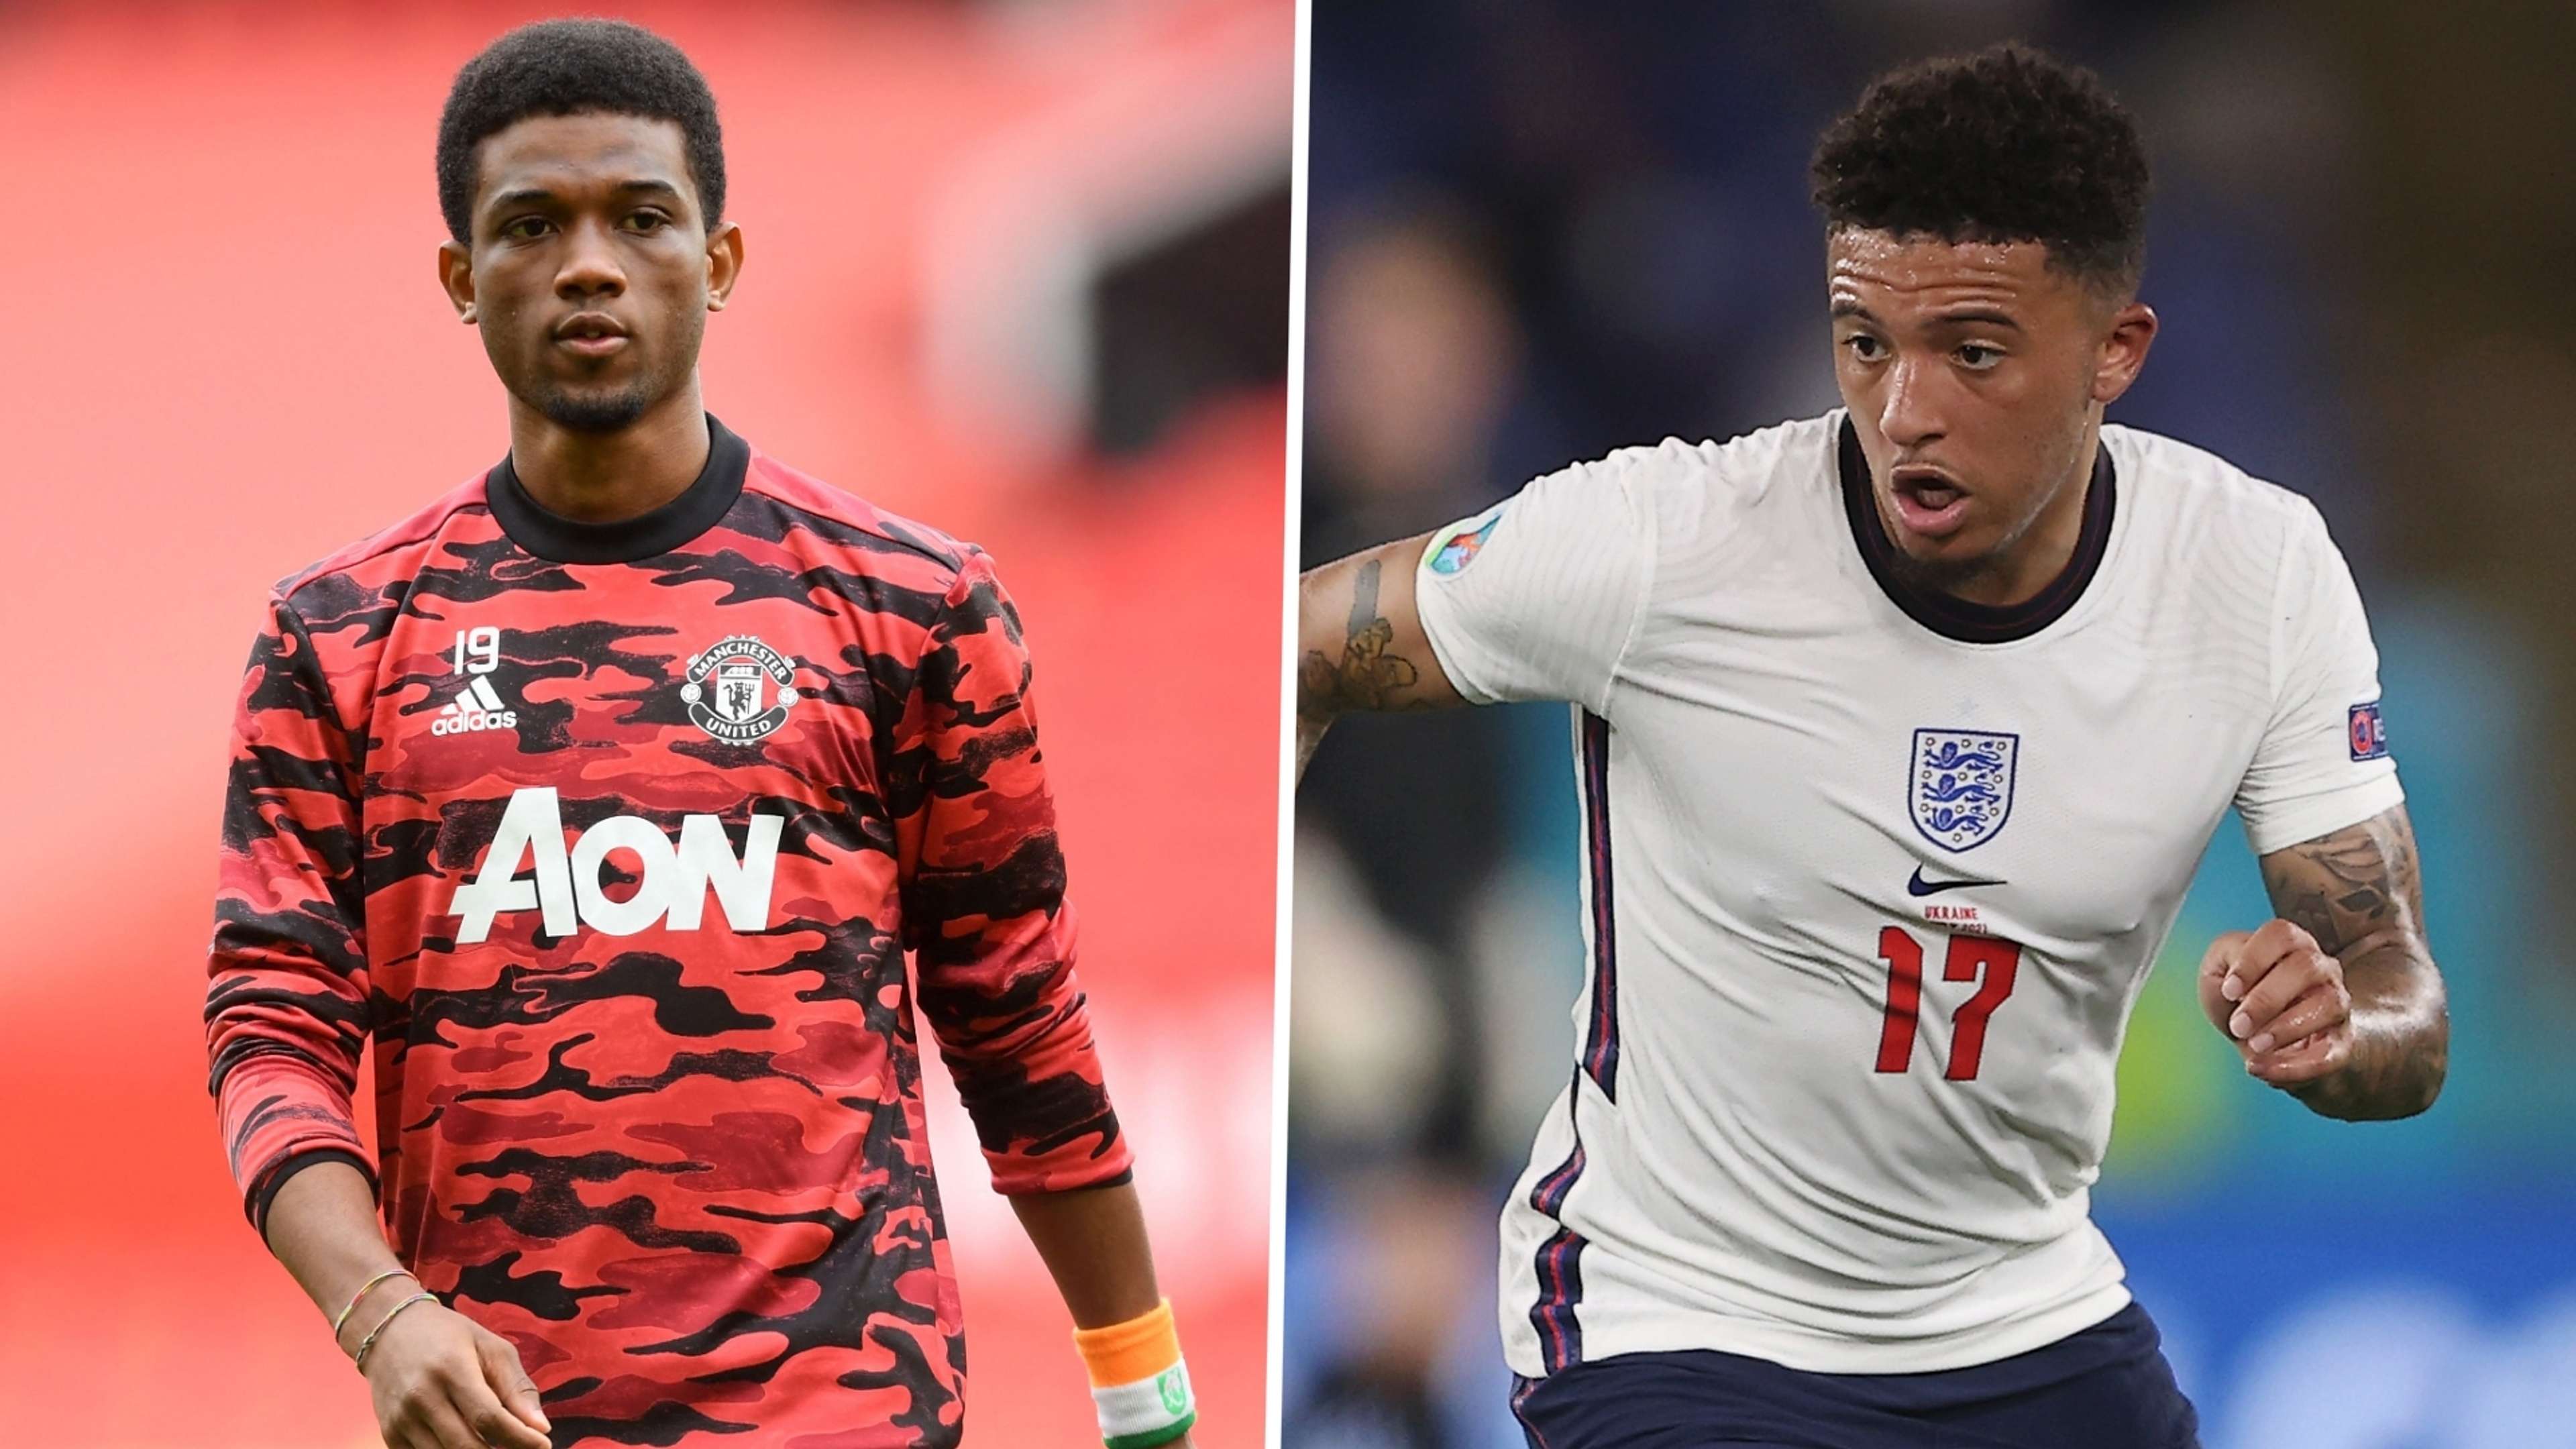 Amad Diallo of Manchester United, England's Jadon Sancho